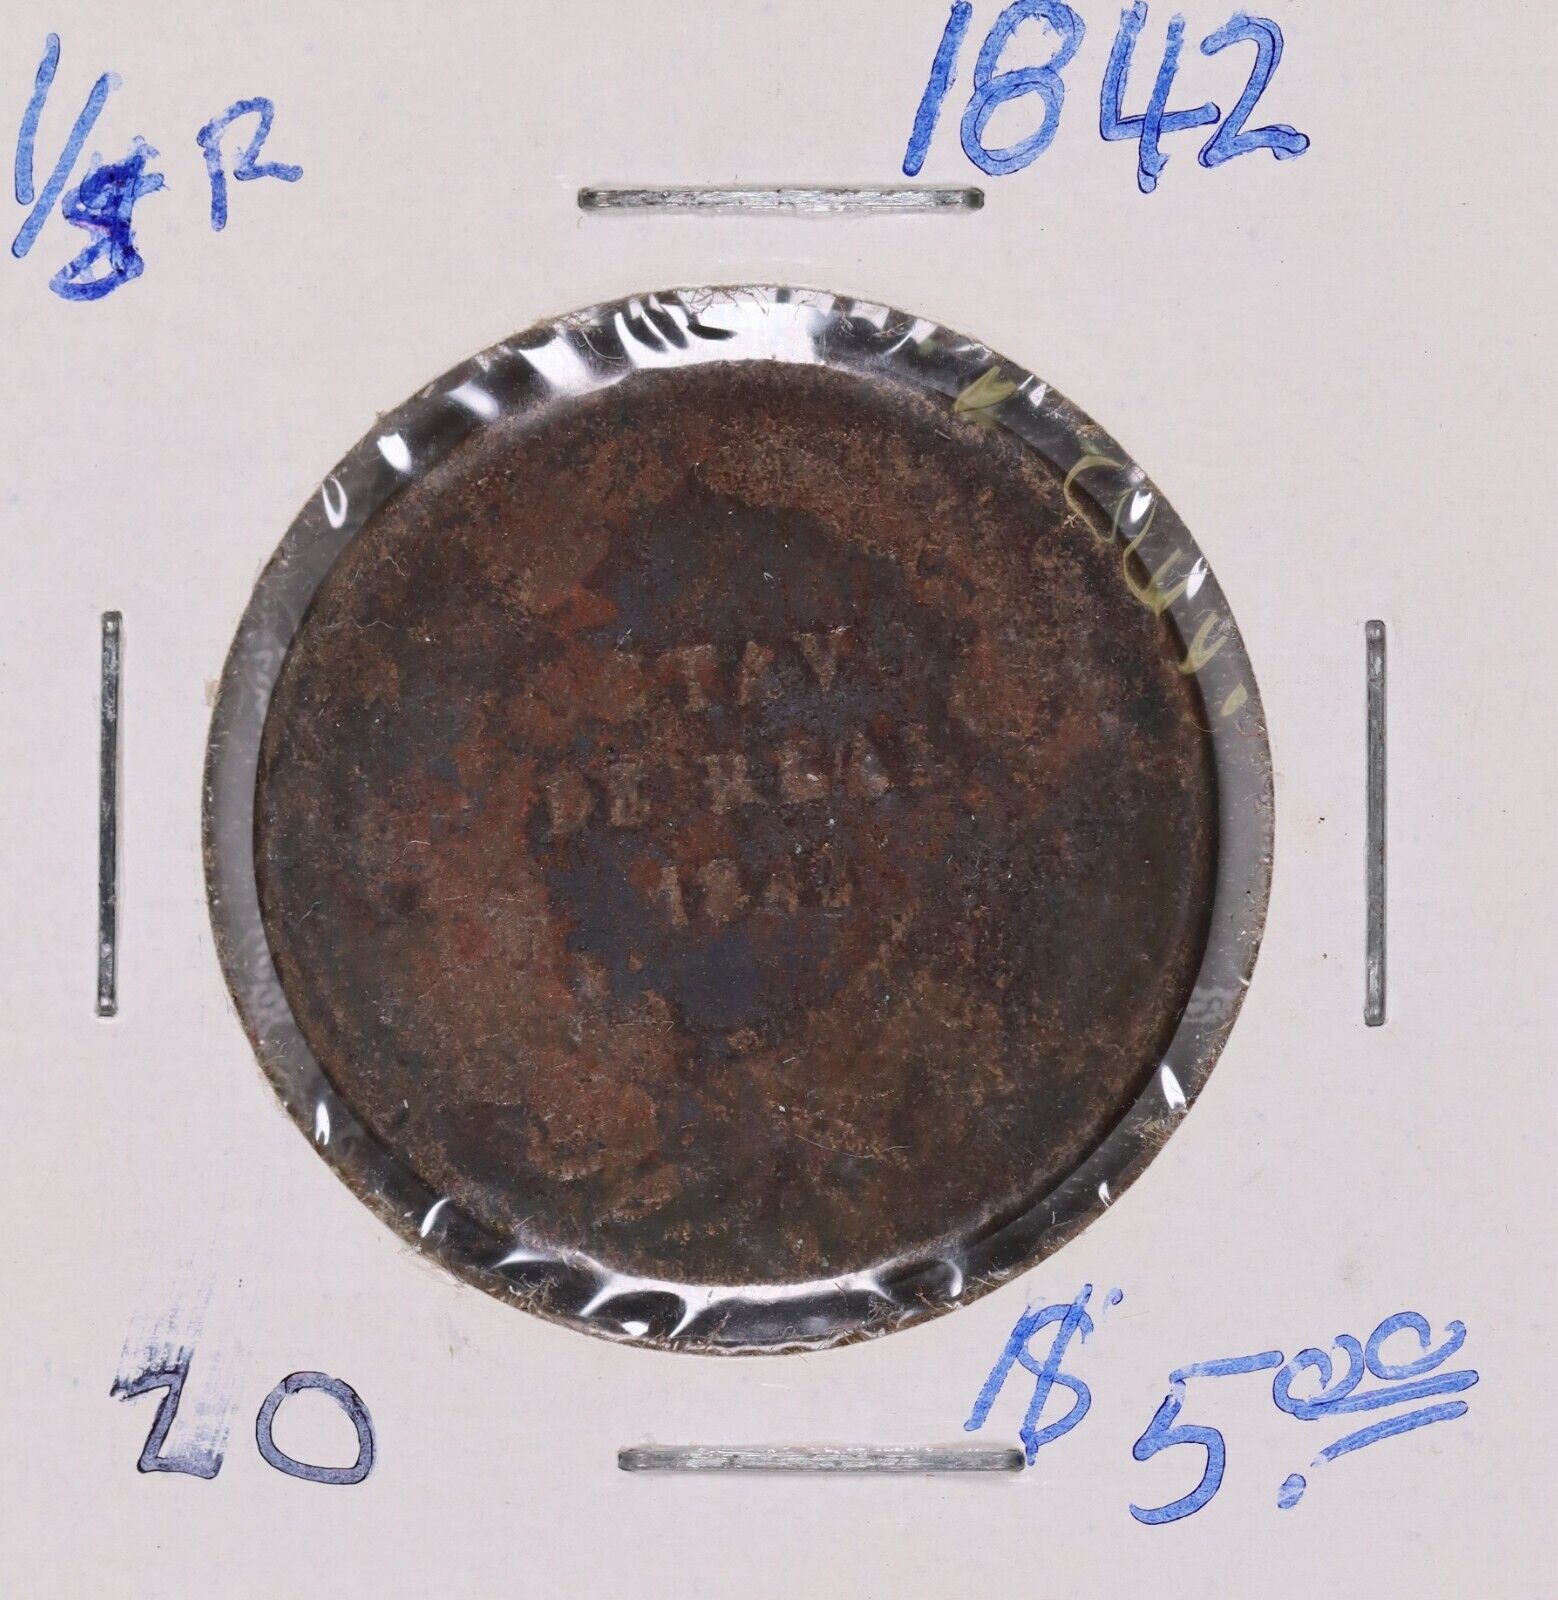 1842 Mexico Federal Coinage 1/8 Real Republic Of Texas Period #2